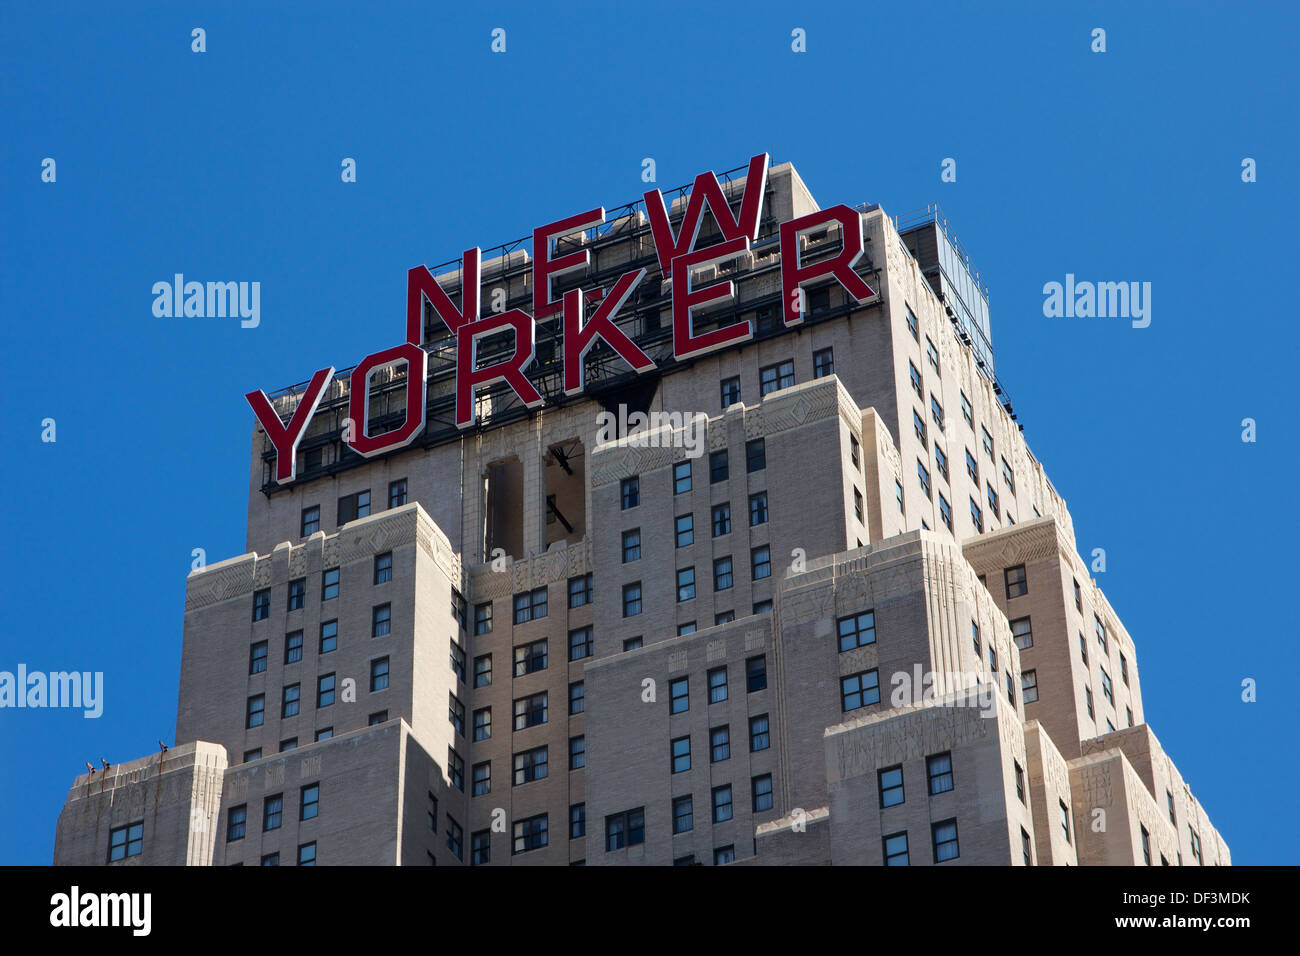 Top of the famous New Yorker Hotel in Midtown Manhattan, New York, NY, USA. Stock Photo